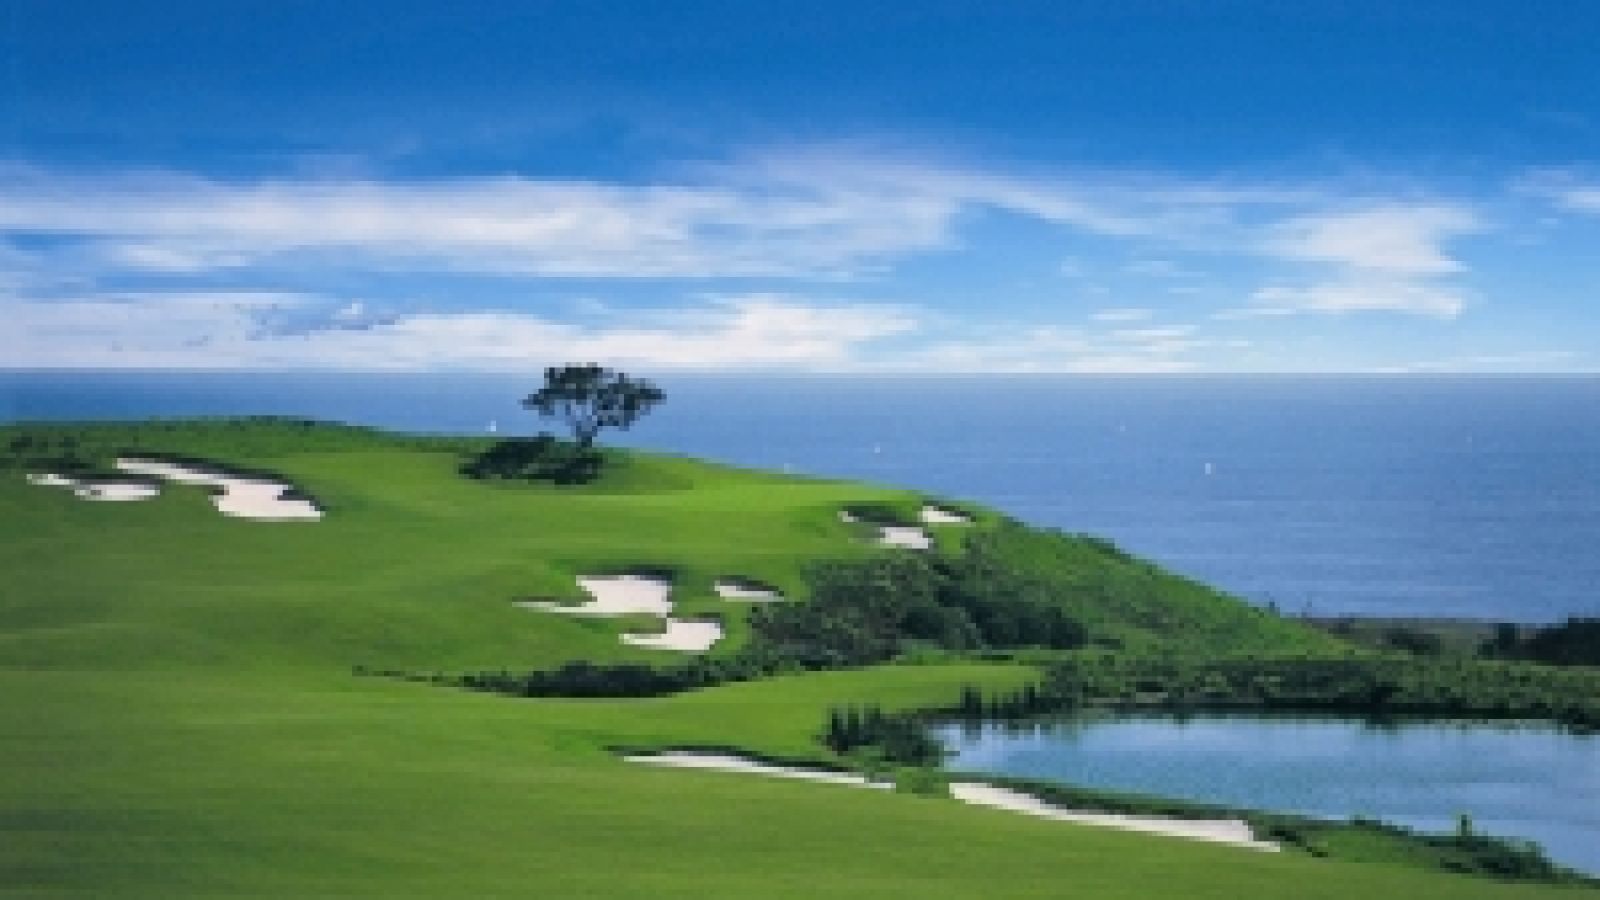 Resort at Pelican Hill - San Diego golf packages